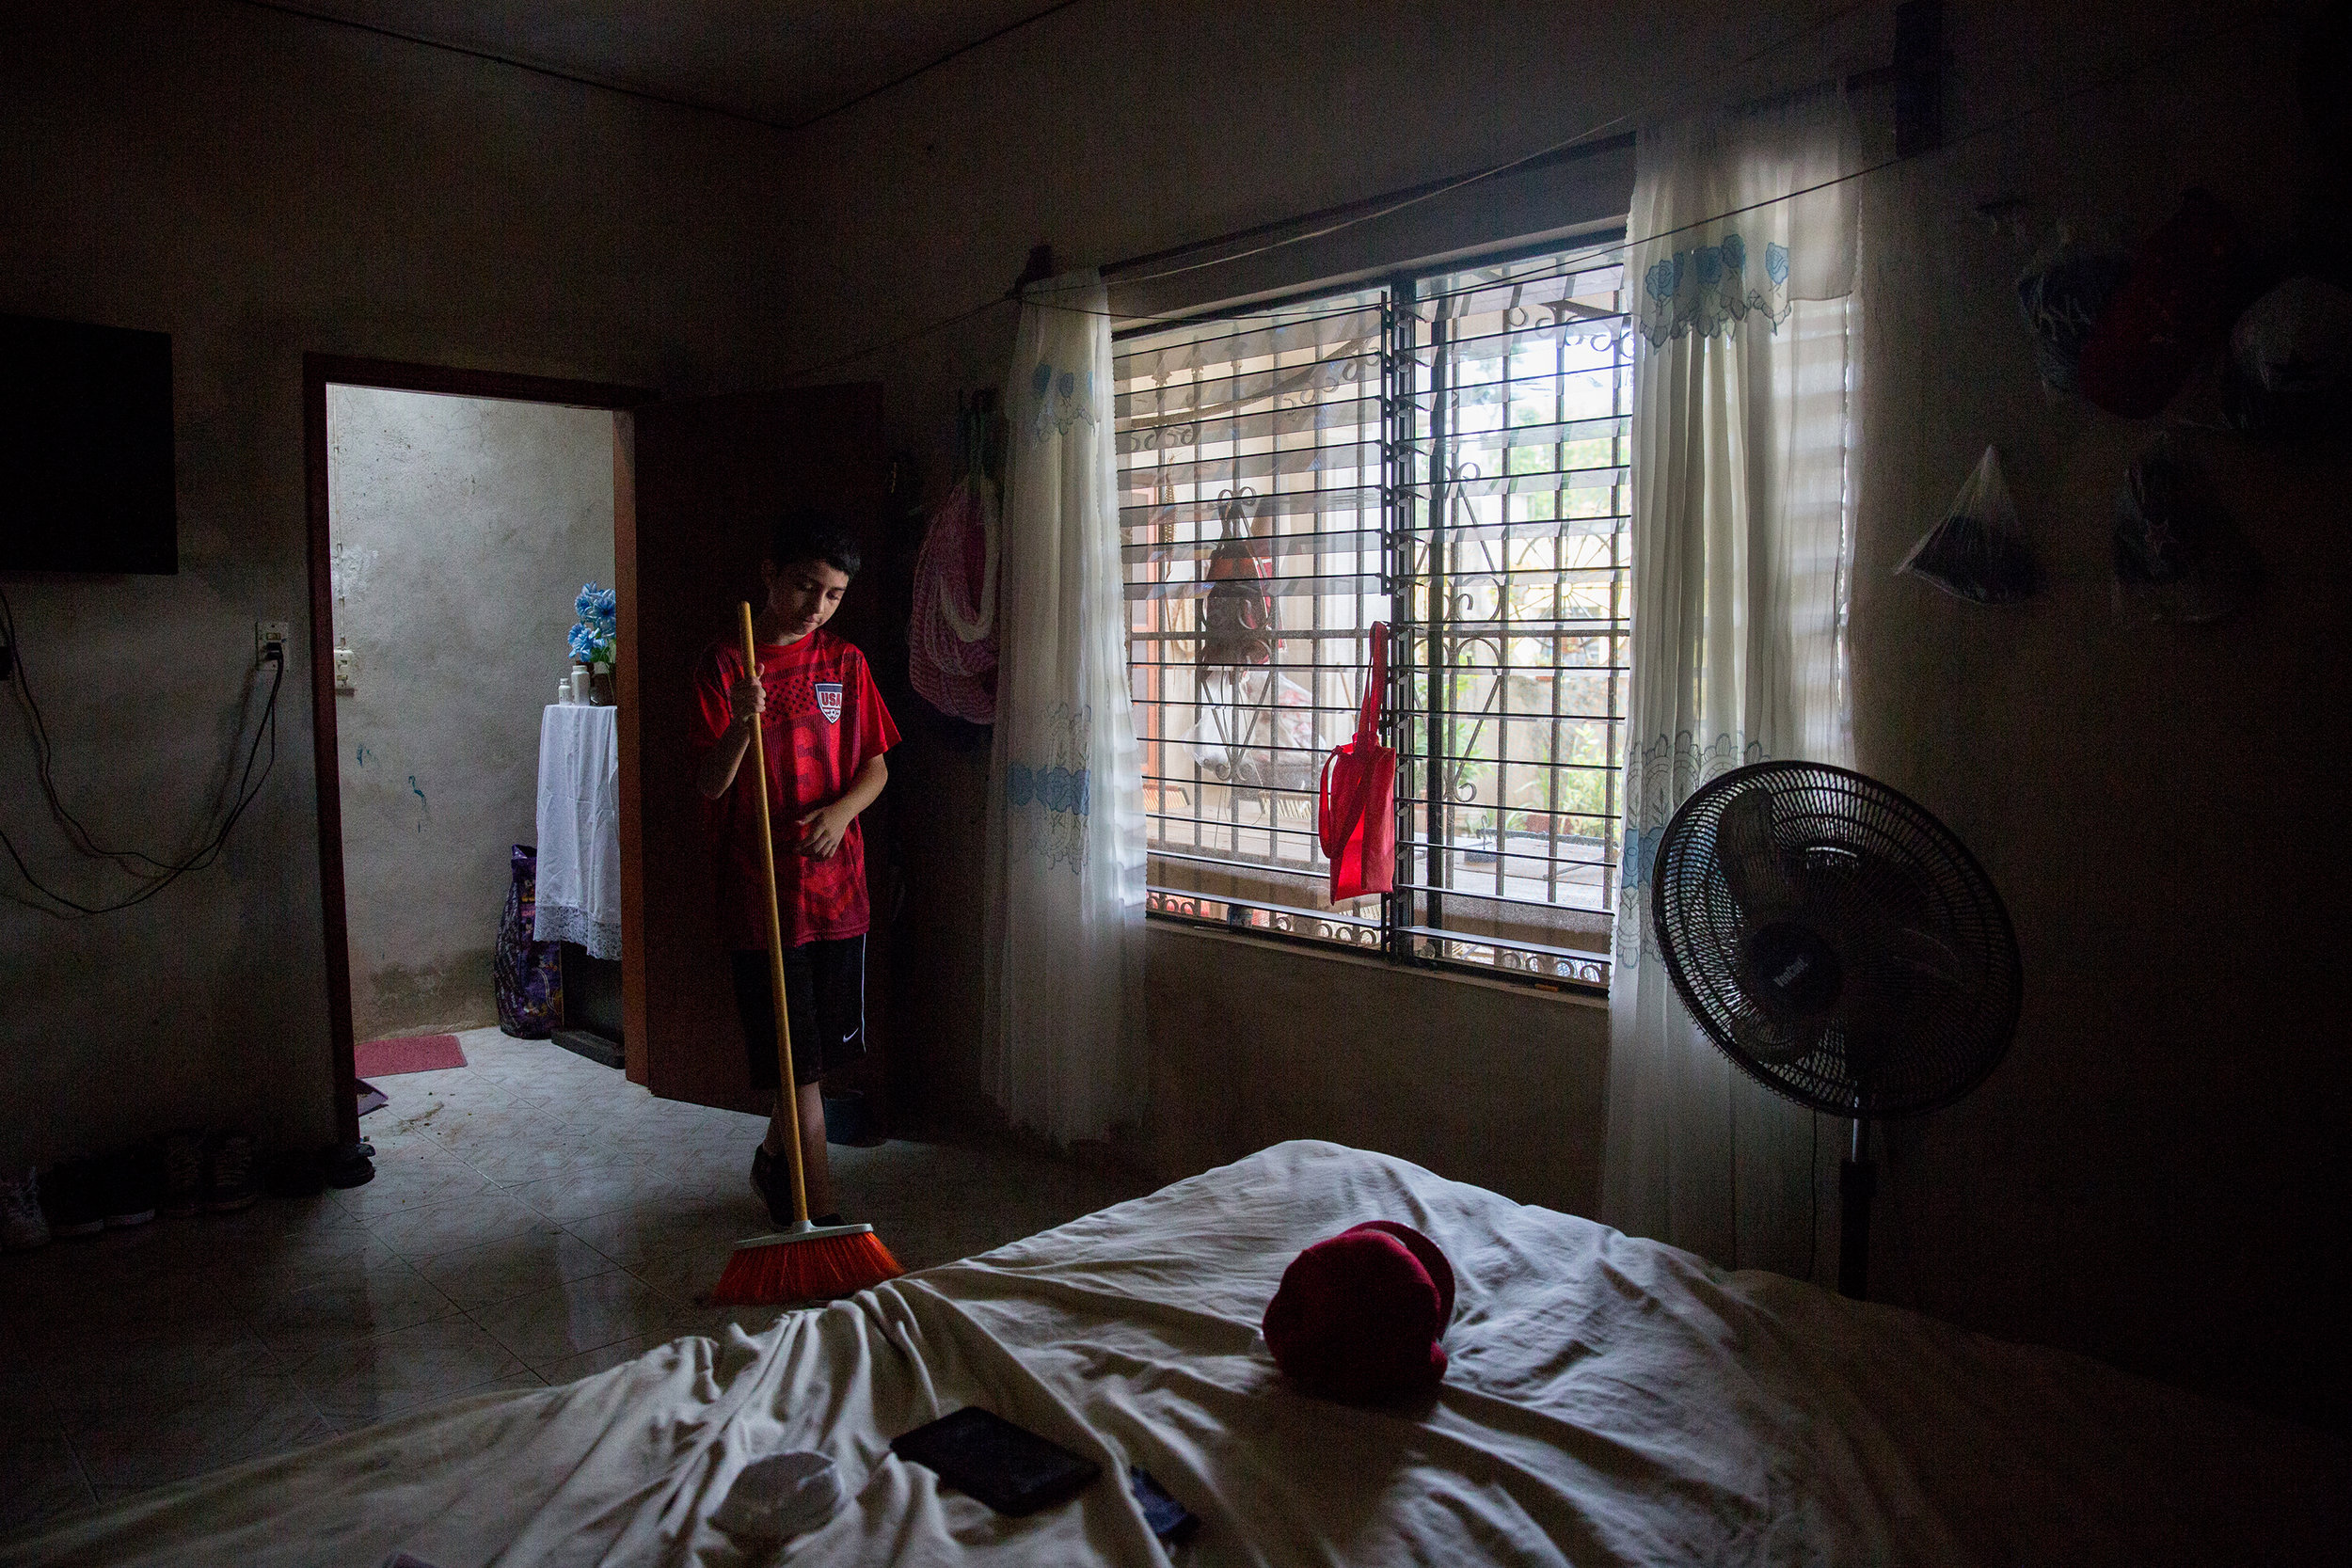  Luis Lara, 12, sweeps up after being told to get off of his phone and help around his aunt and uncle's house in Hoctún, Yucatán. Luis came from Dallas to live with his family and learn Spanish for the summer.&nbsp;(Courtney Pedroza/Dallas Morning Ne